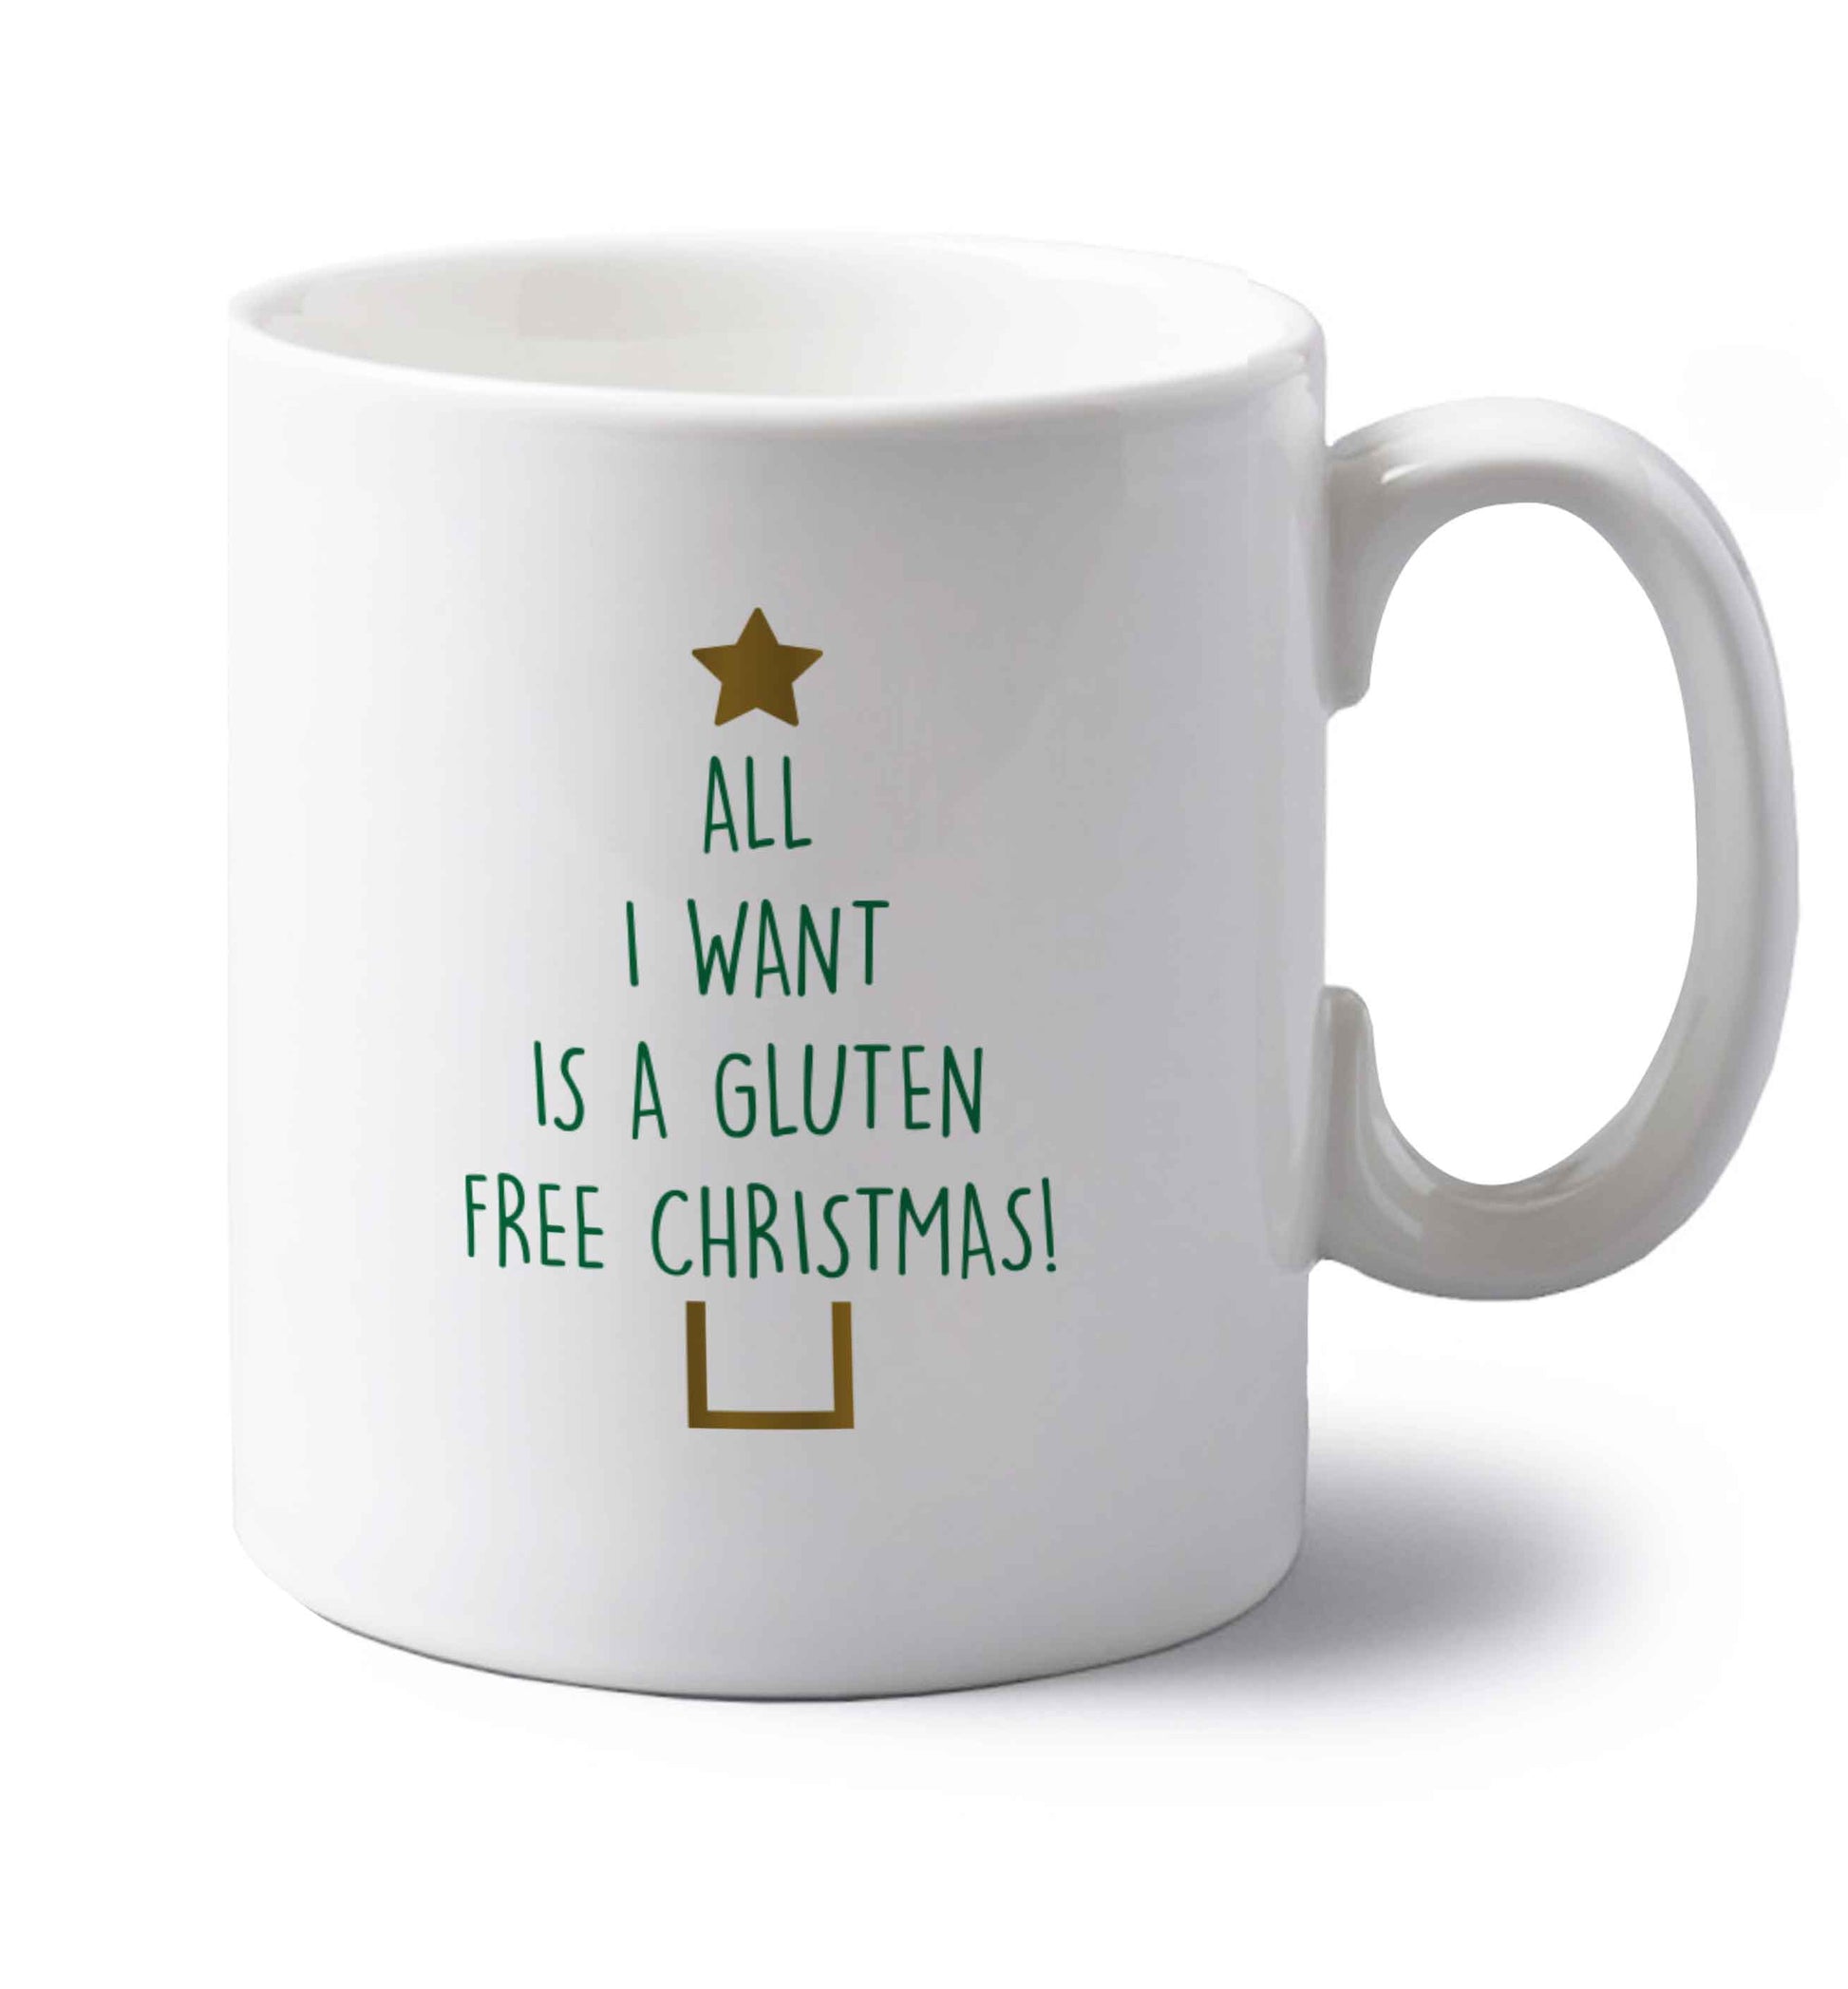 All I want is a gluten free Christmas left handed white ceramic mug 